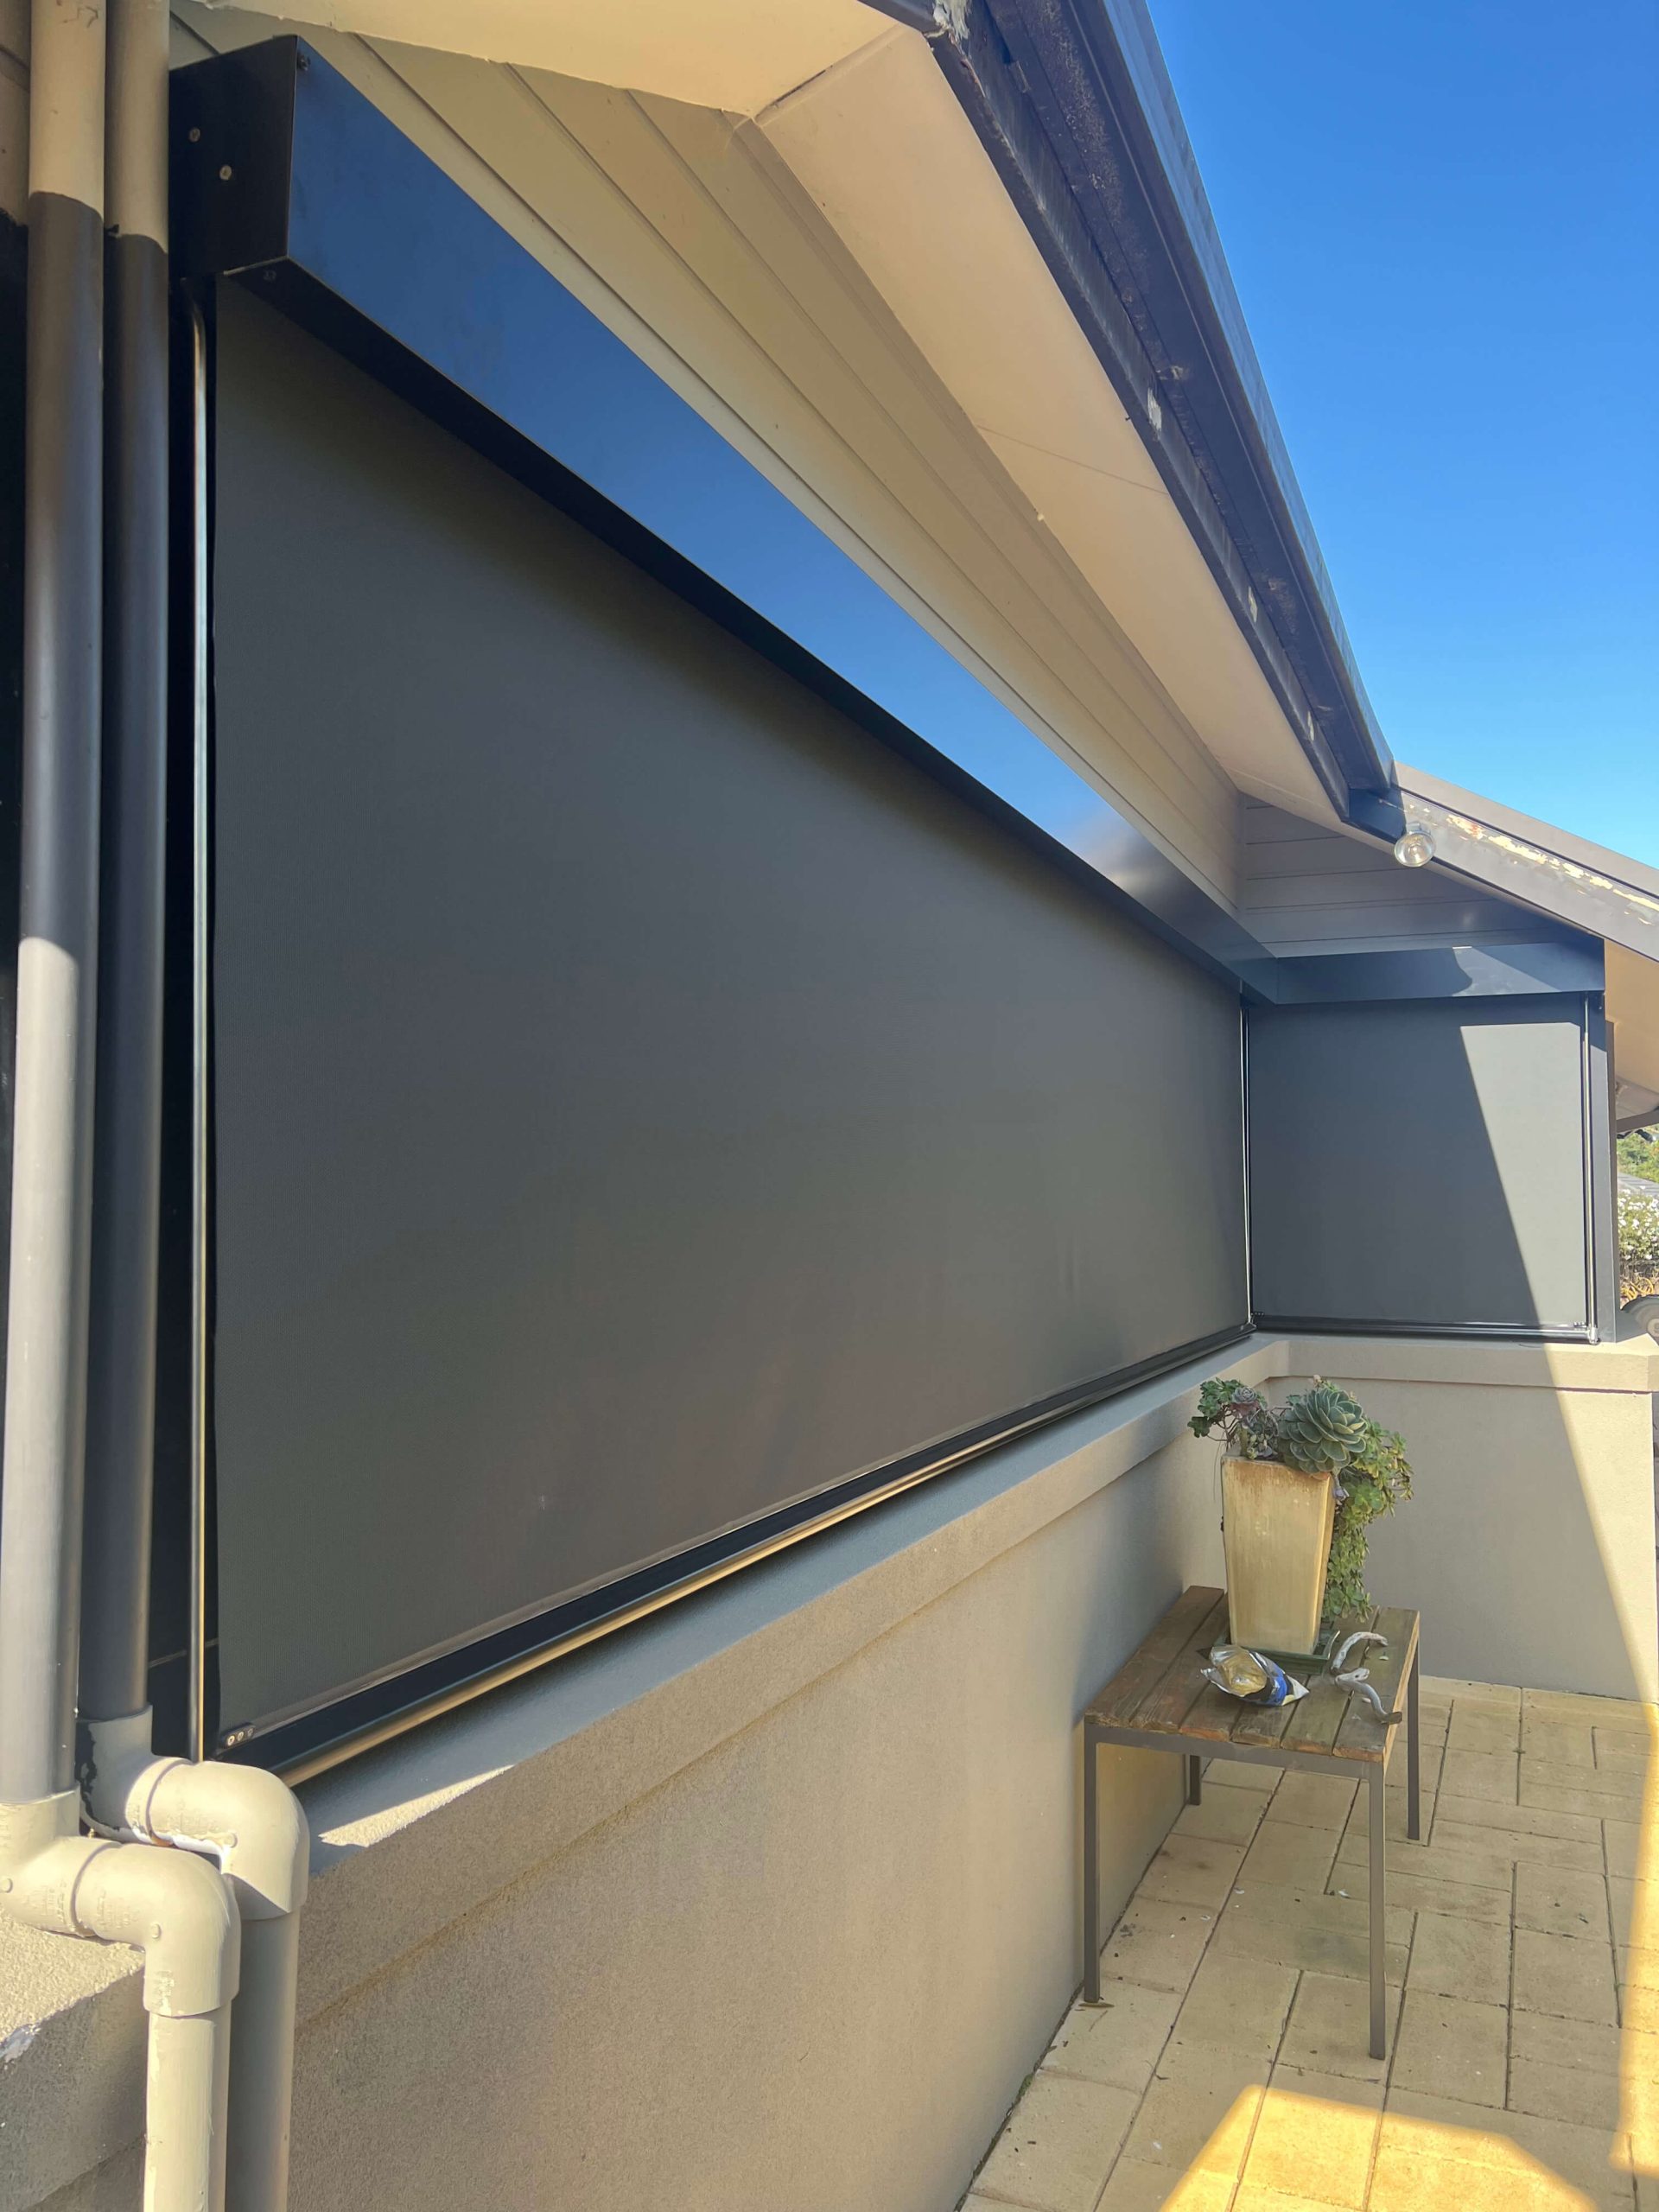 Fixed Guide Awnings Melbourne